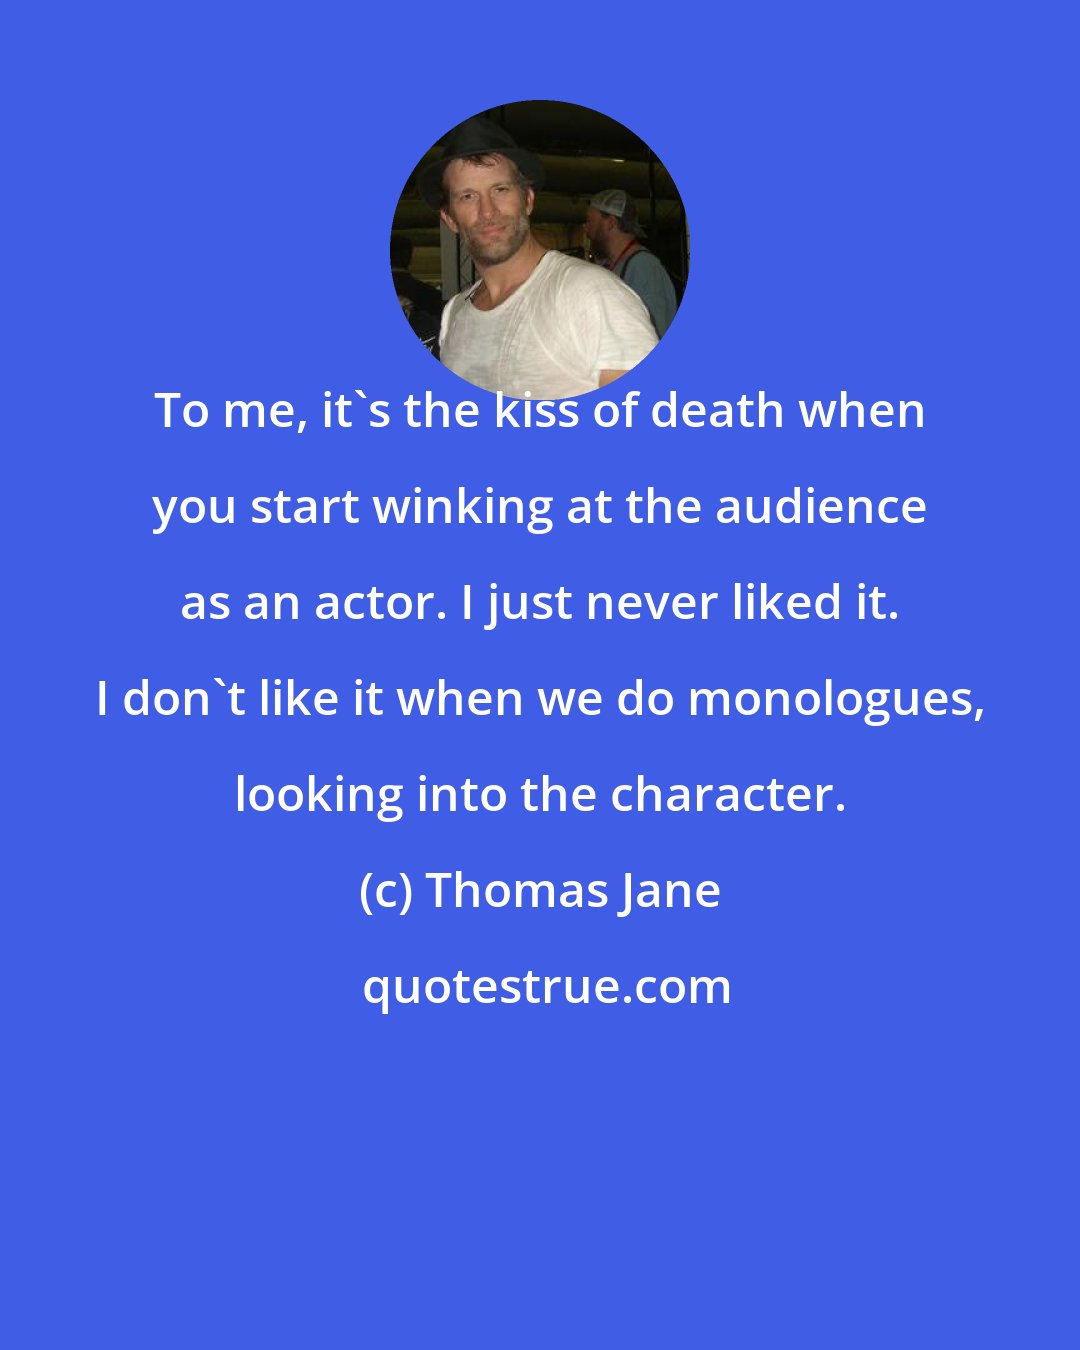 Thomas Jane: To me, it's the kiss of death when you start winking at the audience as an actor. I just never liked it. I don't like it when we do monologues, looking into the character.